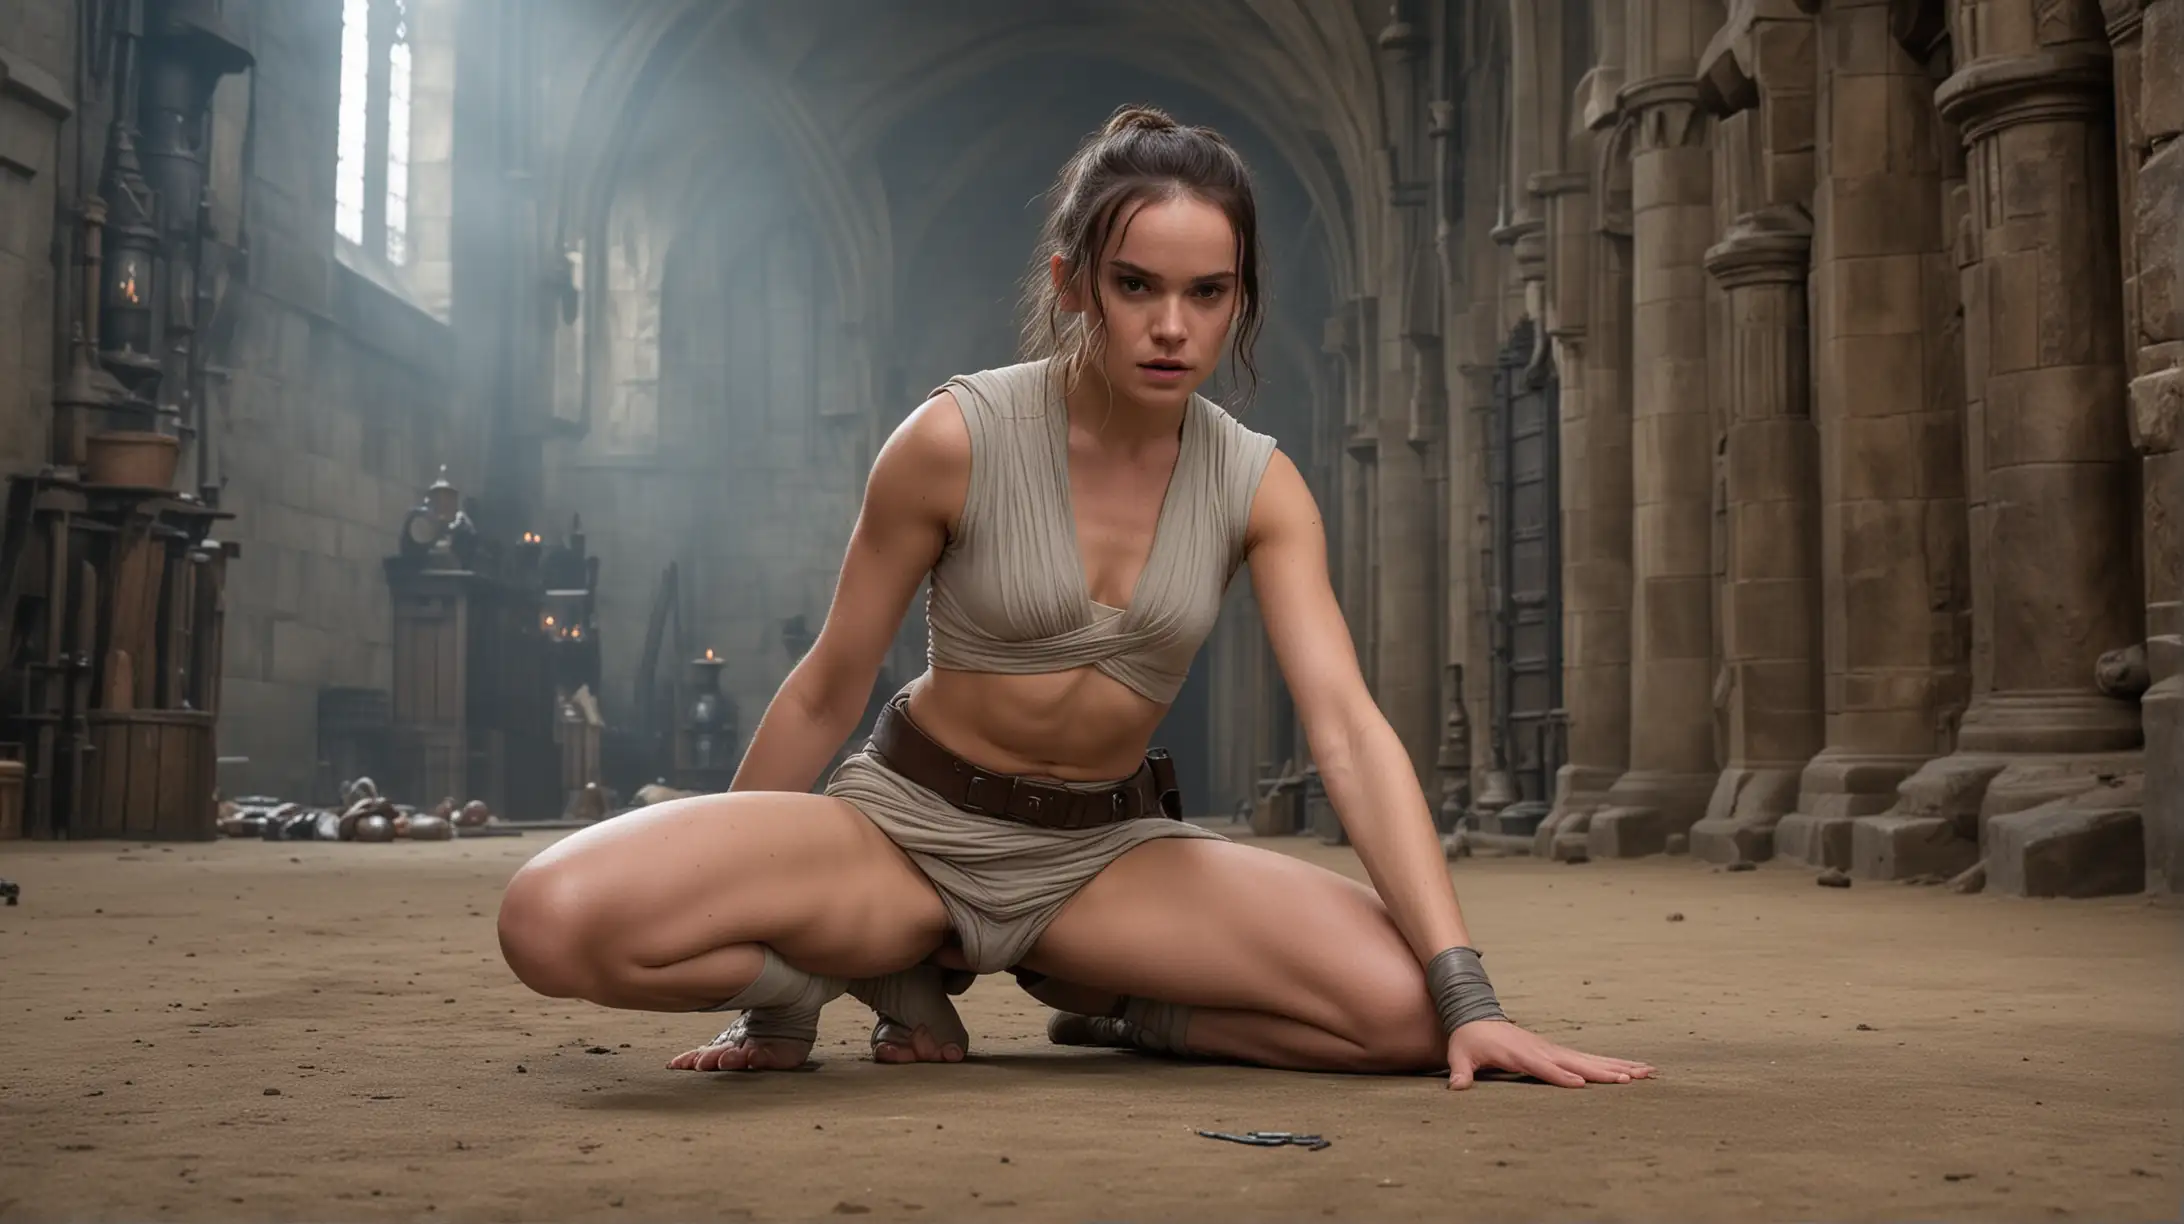 Shy totally nude Daise Ridley as Rey Skywalker squatting bent over in Hogwarts